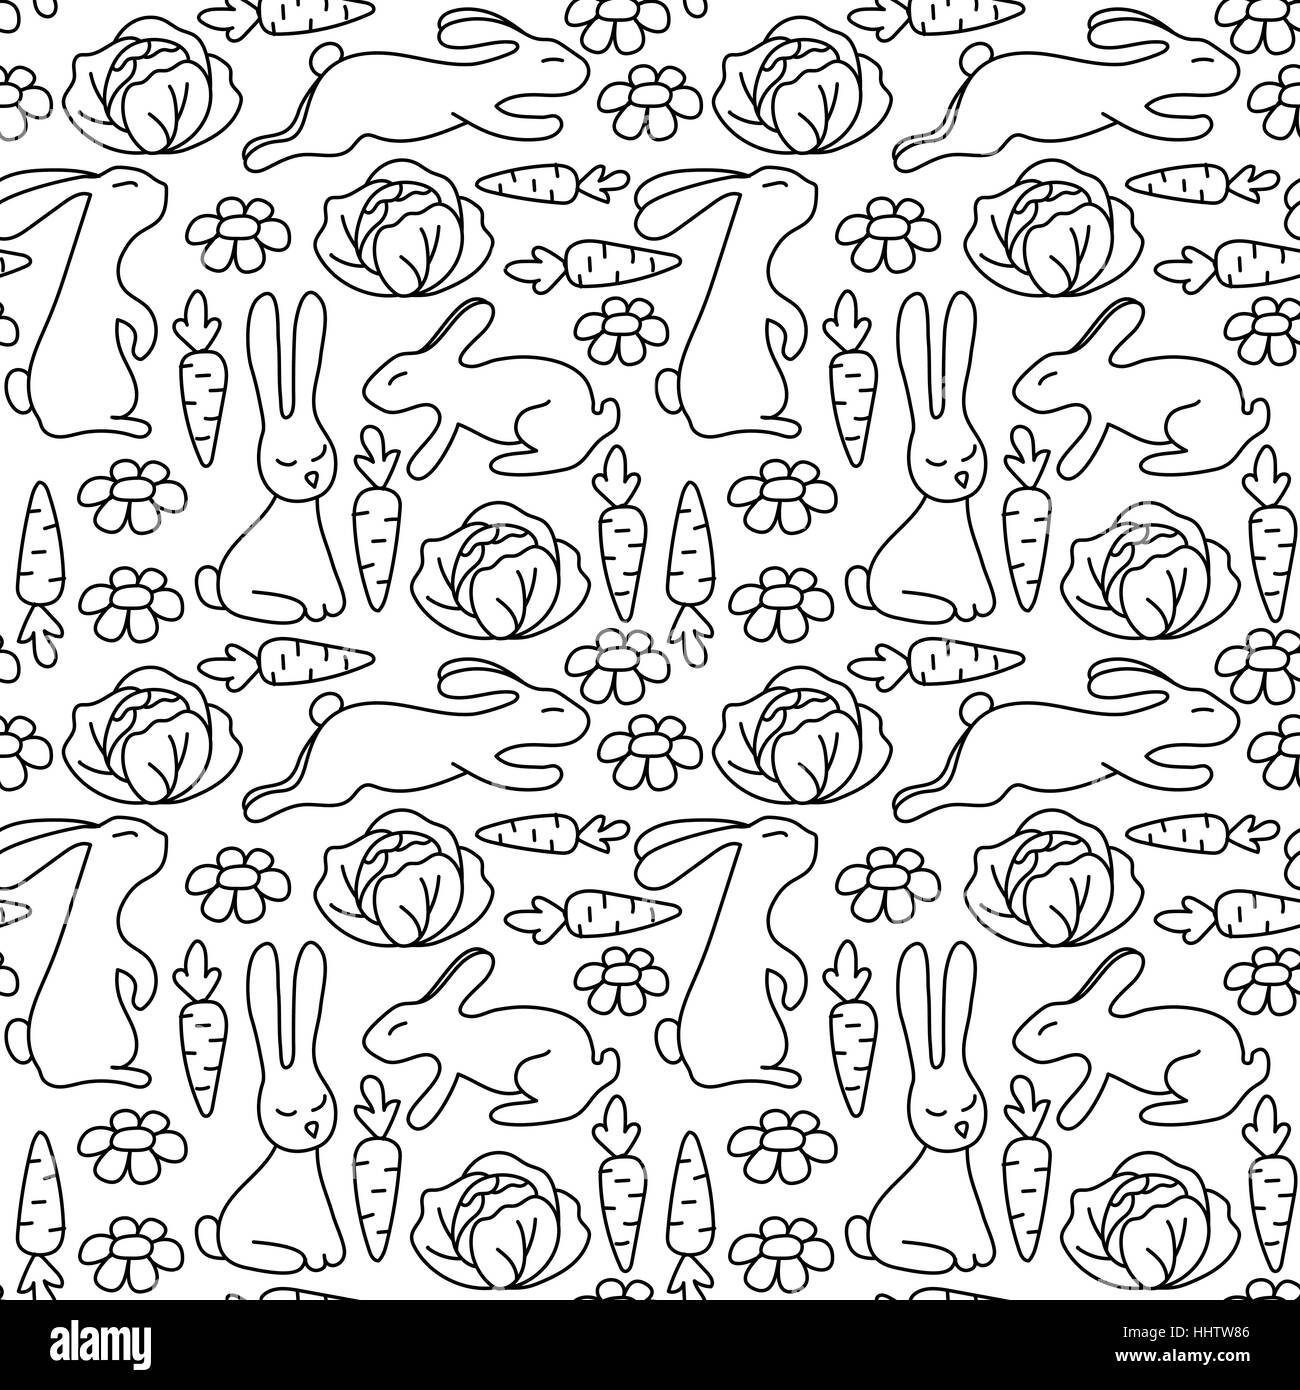 Seaemless pattern with rabbits. Pattern for coloring book. Hand-drawn decorative elements in vector. Rabbits, carrot, cabbage and flowers. Black and white pattern. Zentangle Stock Vector